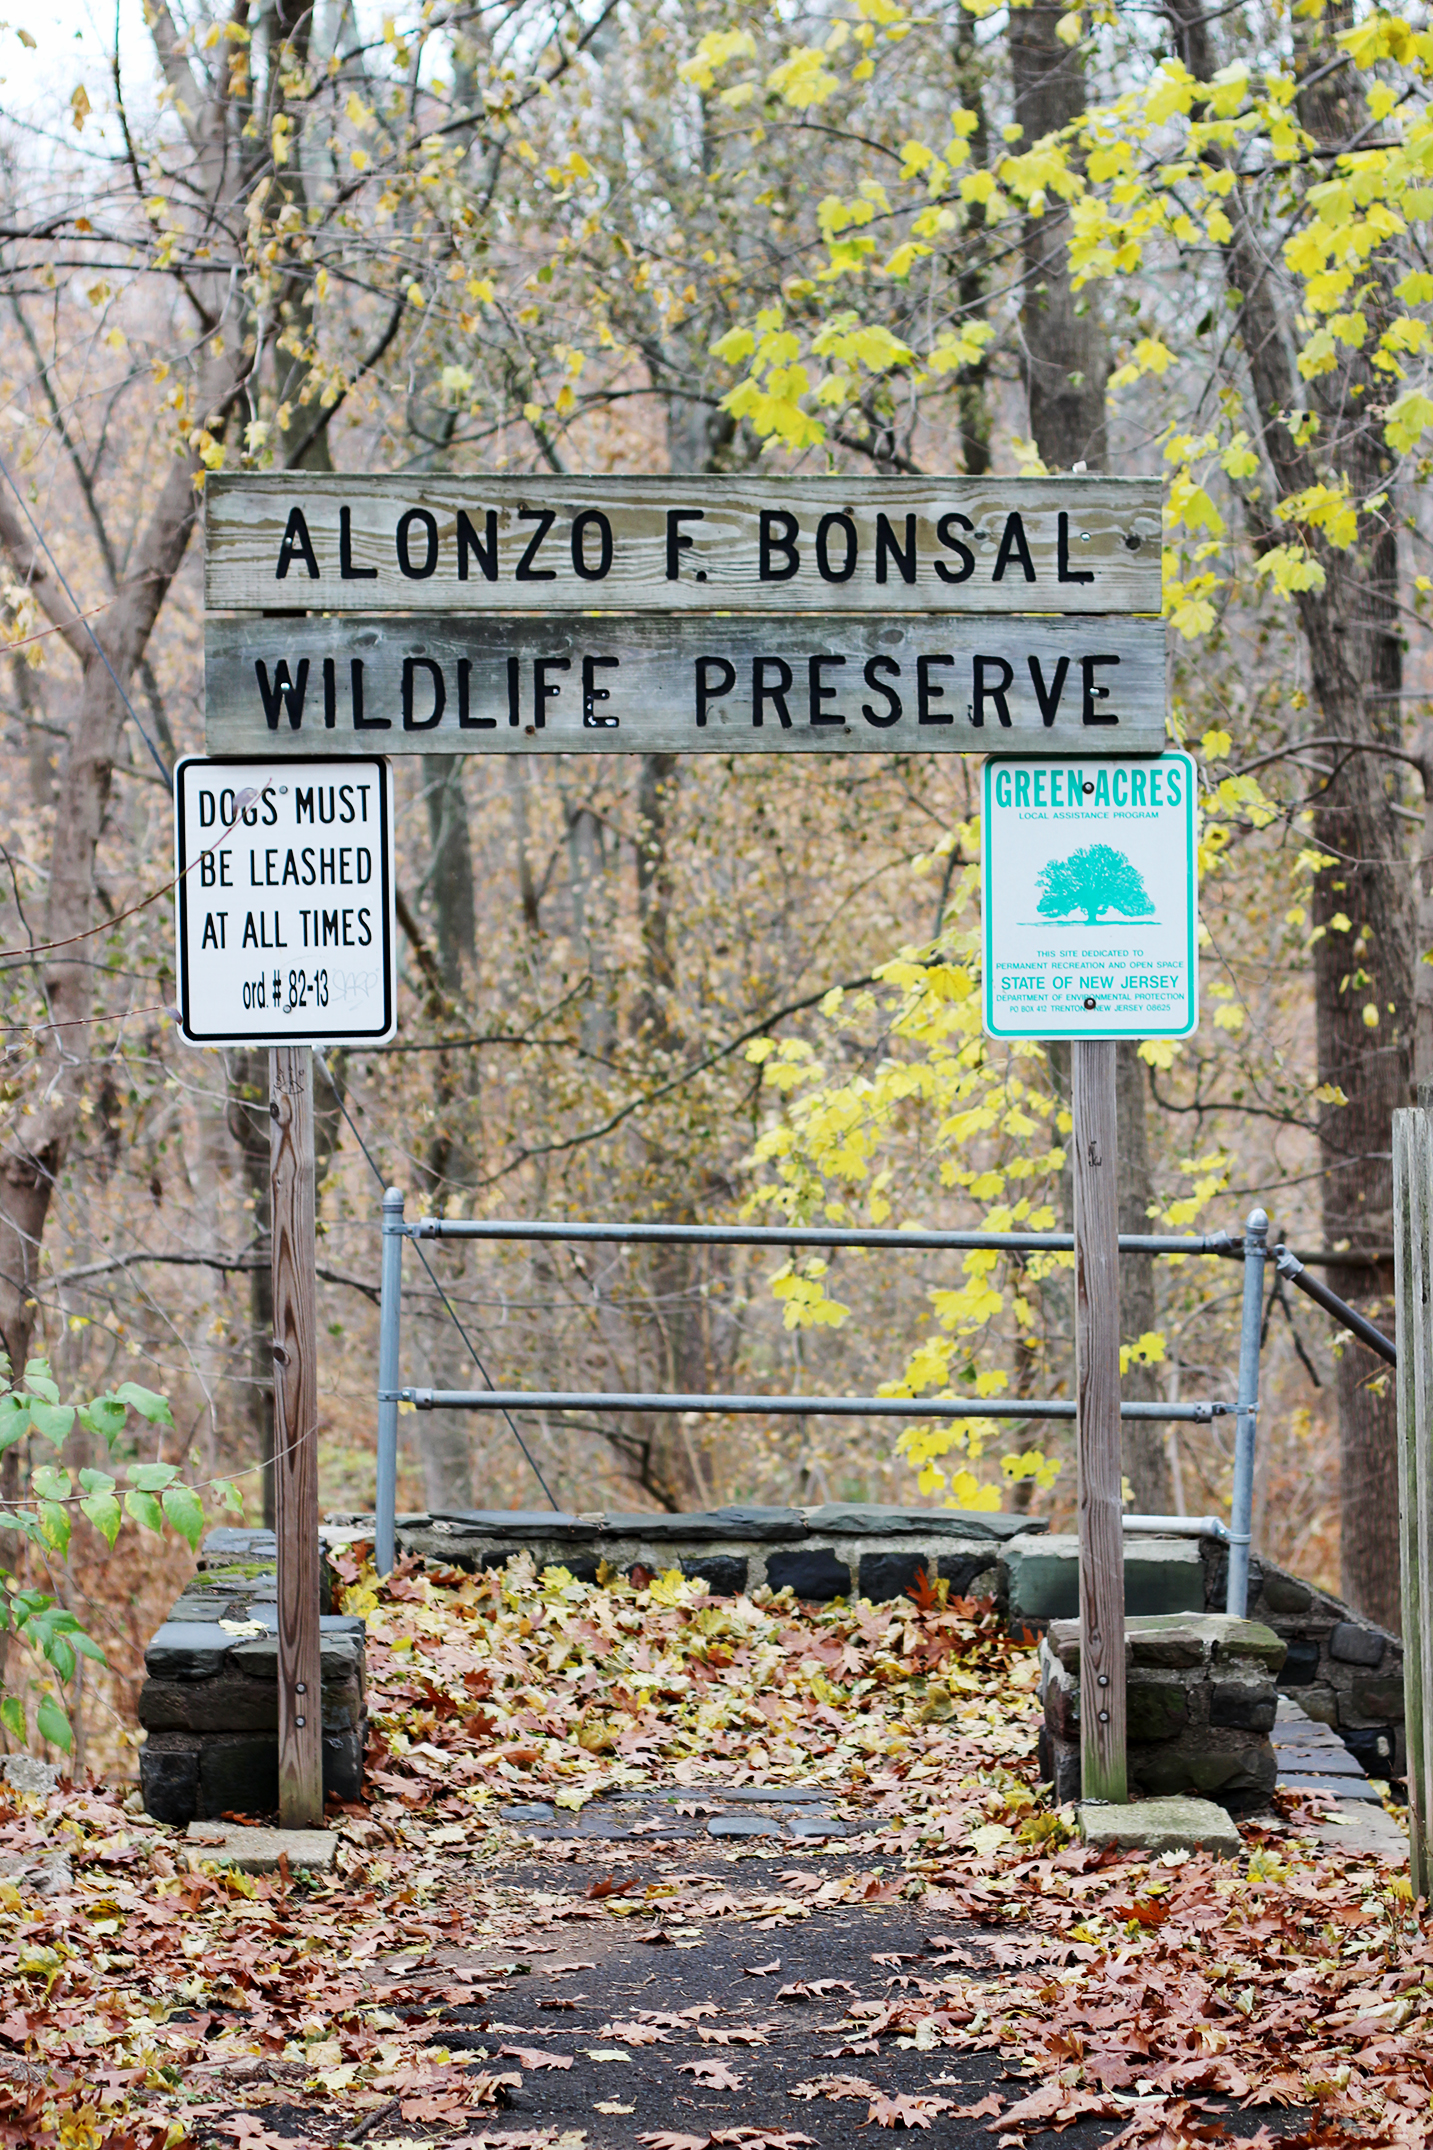 Friends of Bonsal Preserve raise concerns over planned tree cutting